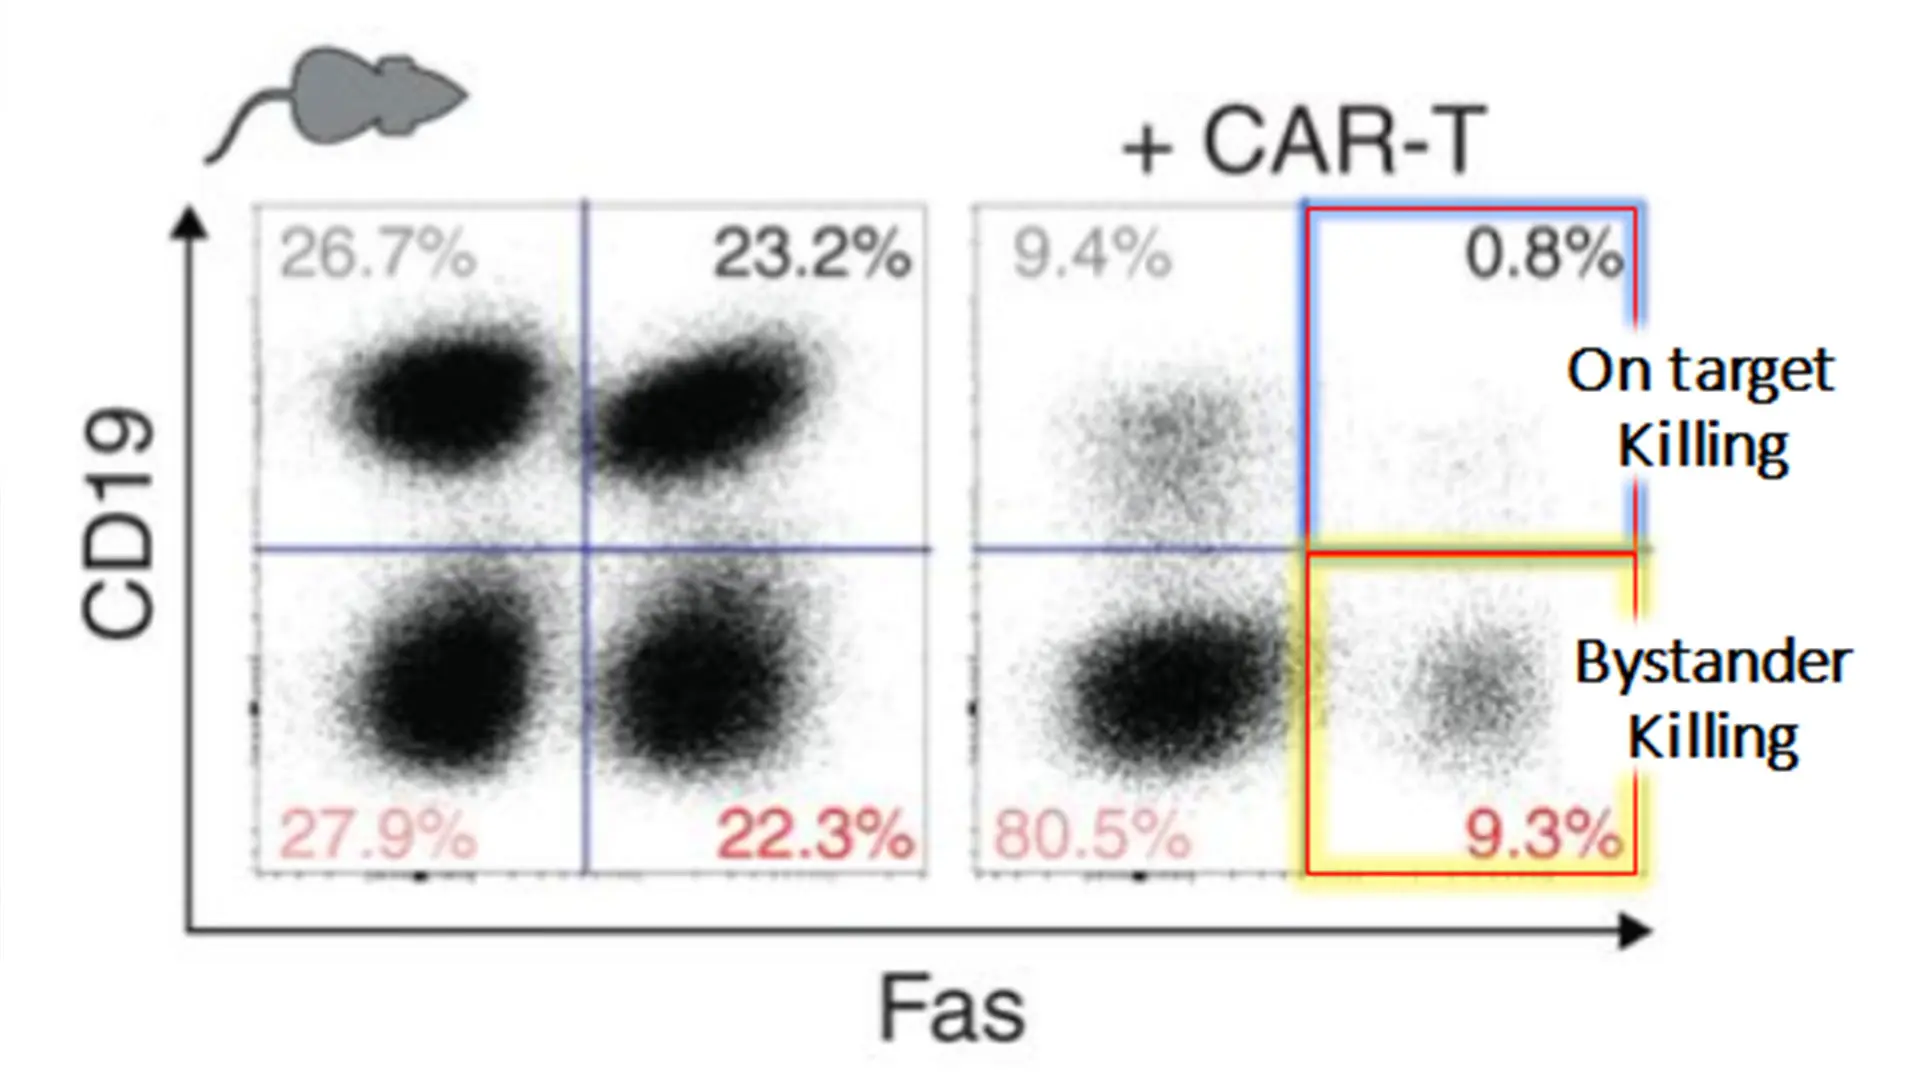 Mixtures of CRISPR gene-edited murine lymphoma cells were treated with murine anti-CD19 CAR-T cells, demonstrating that both "On Target" and "Bystander" lymphoma killing is highly fas-dependent. Patients with high fas-expressing tumors were more likely to have durable remissions. 



 



   









   












